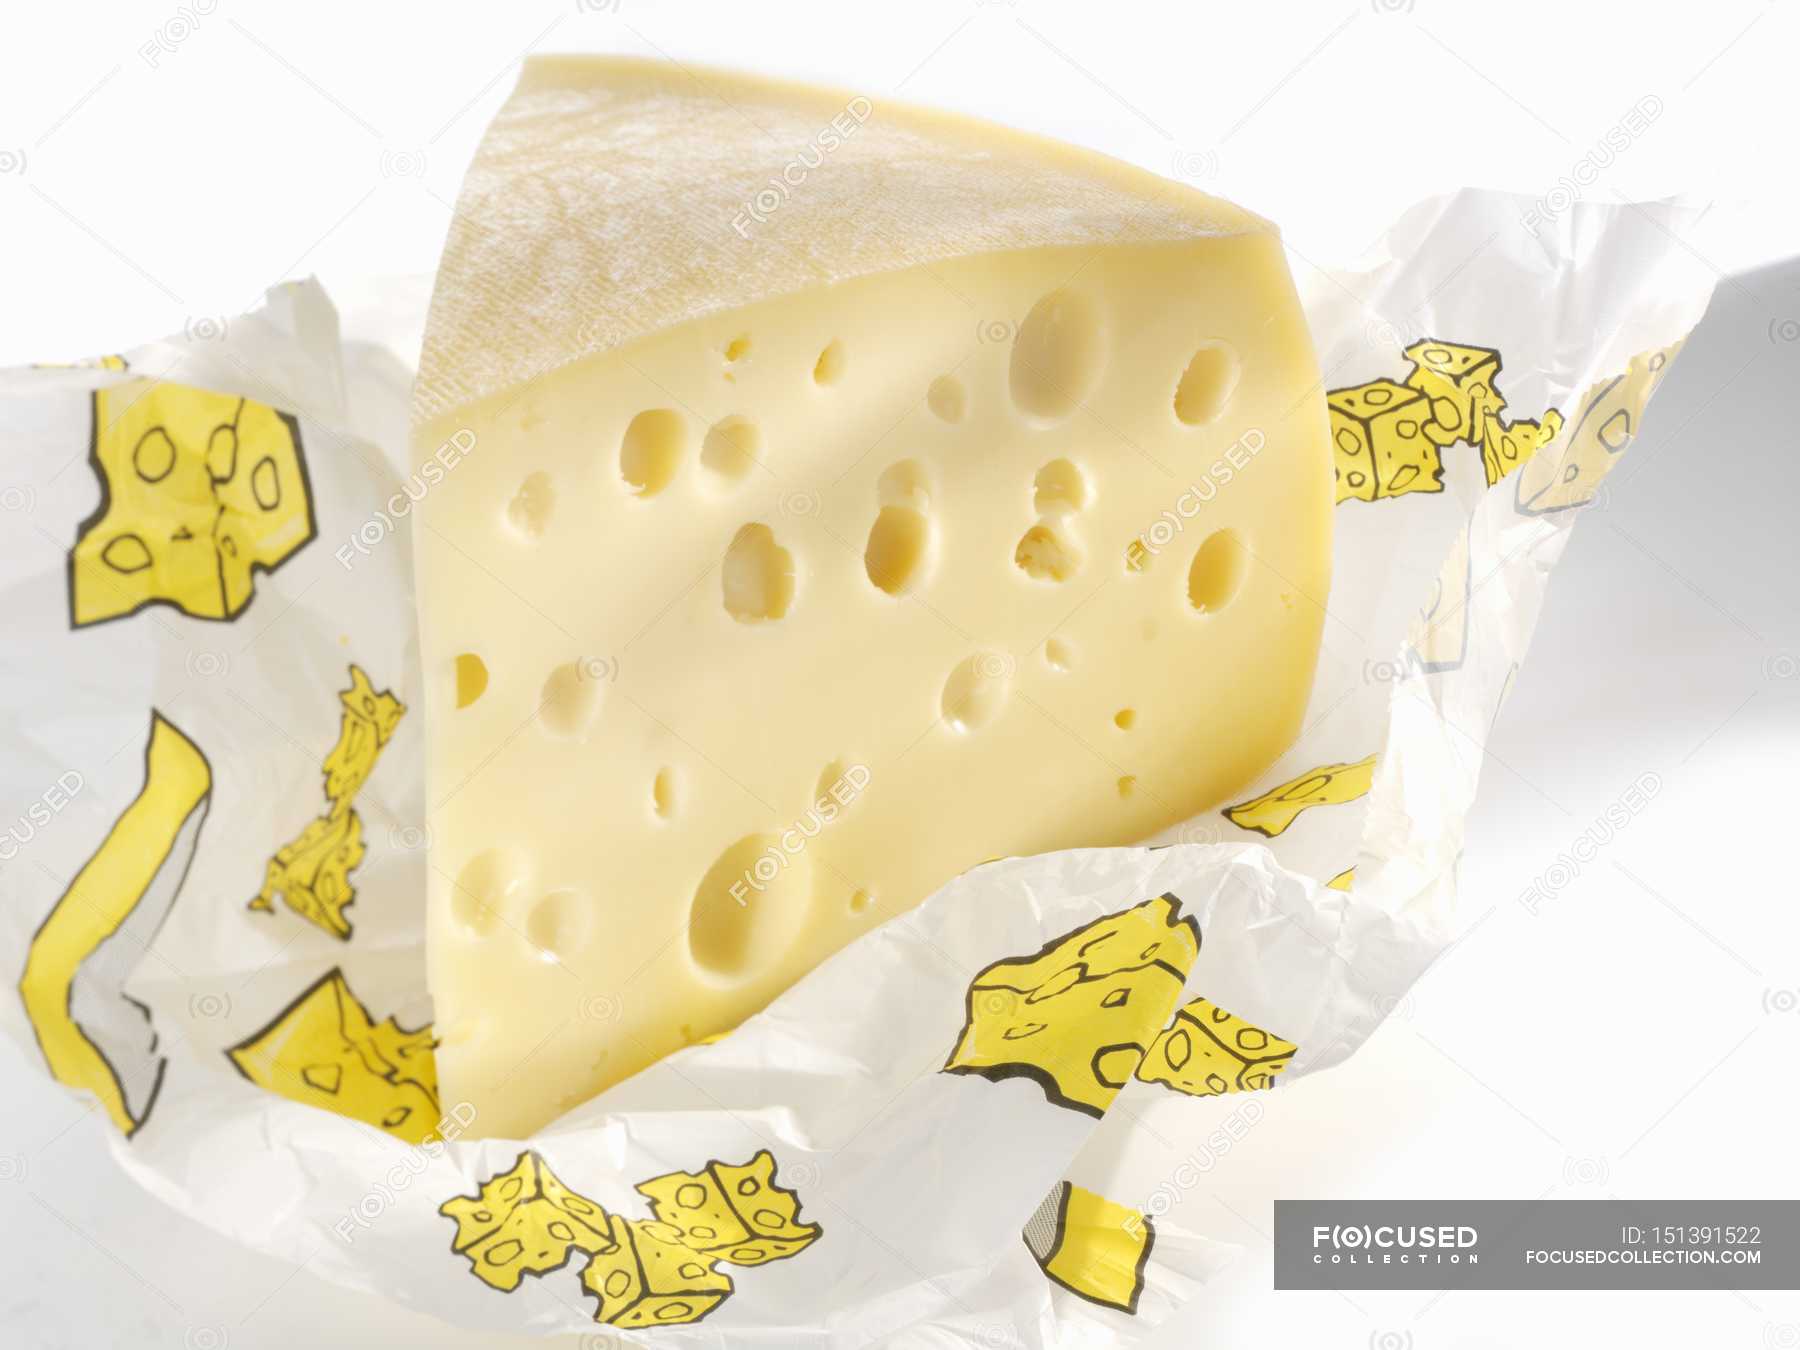 Piece Of Emmental Cheese Restaurant Nutrition Stock Photo 151391522